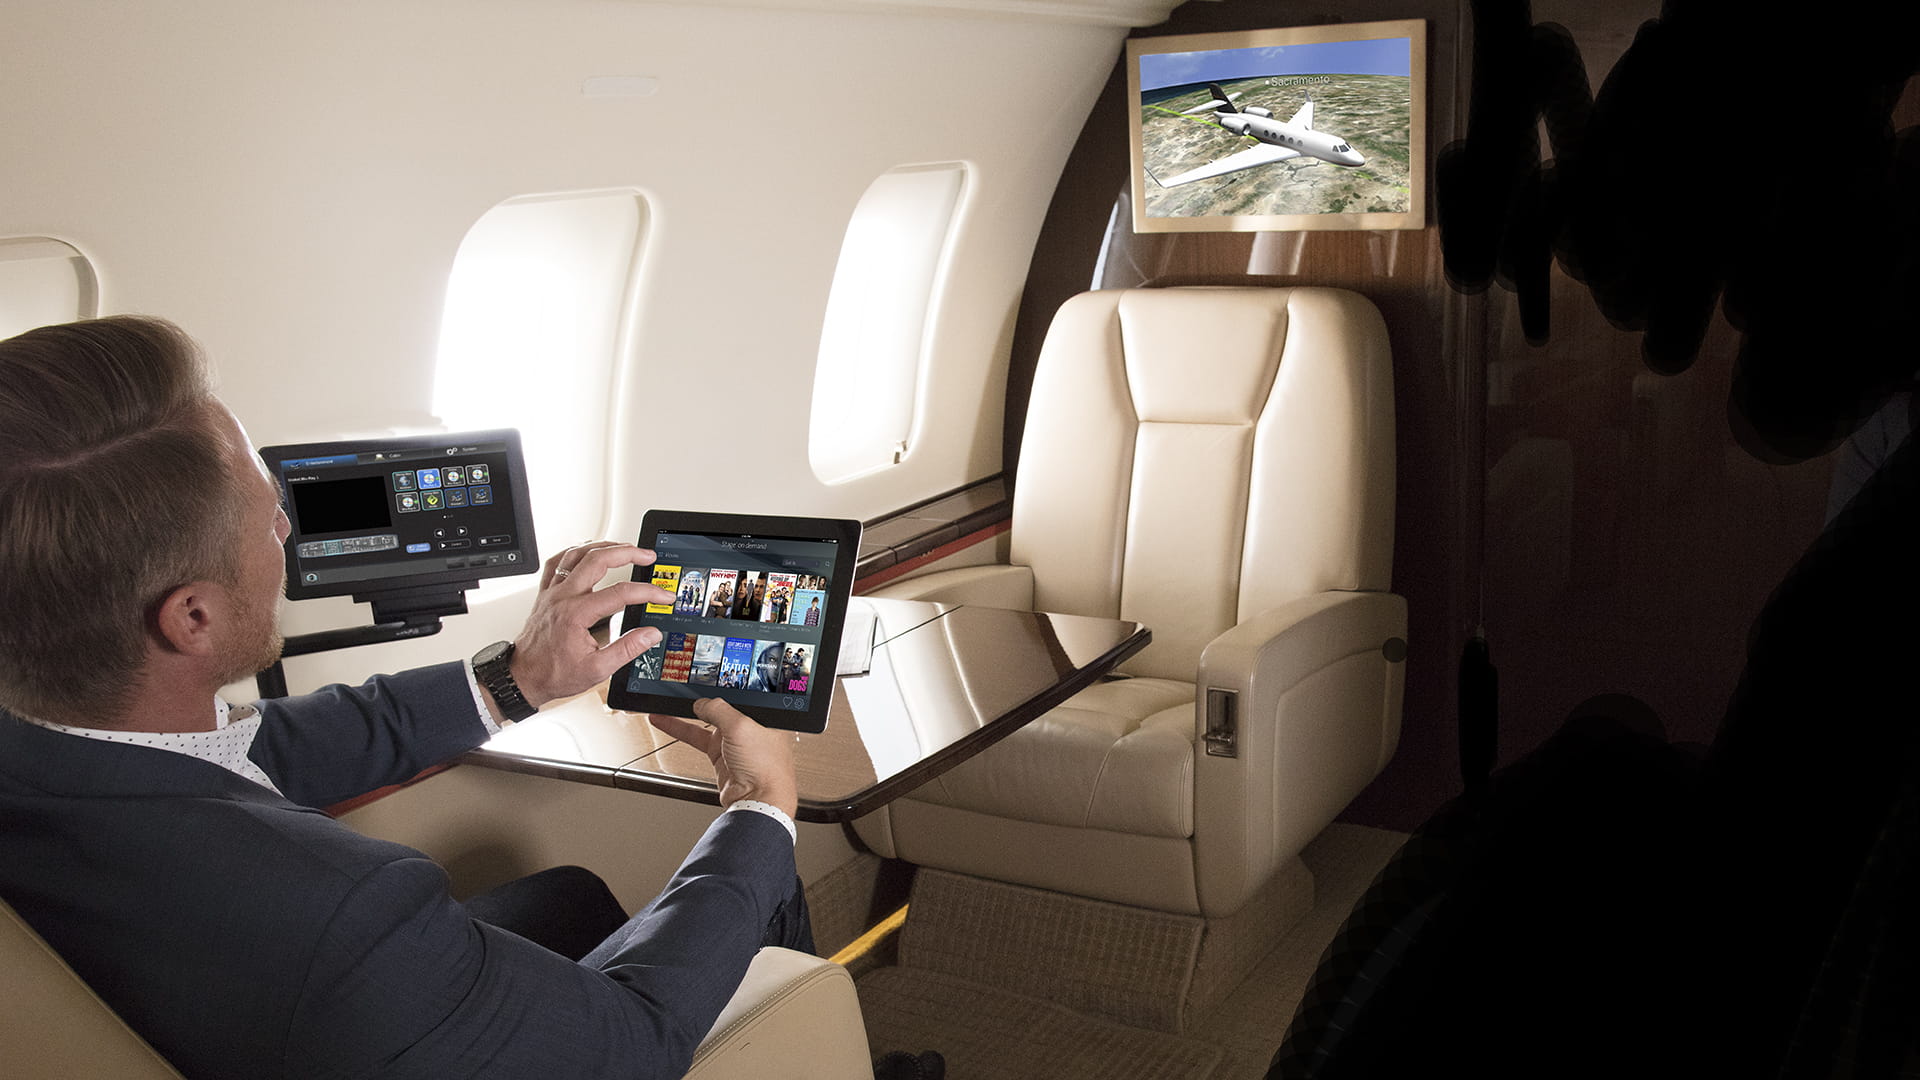 Business man in private jet using tablet